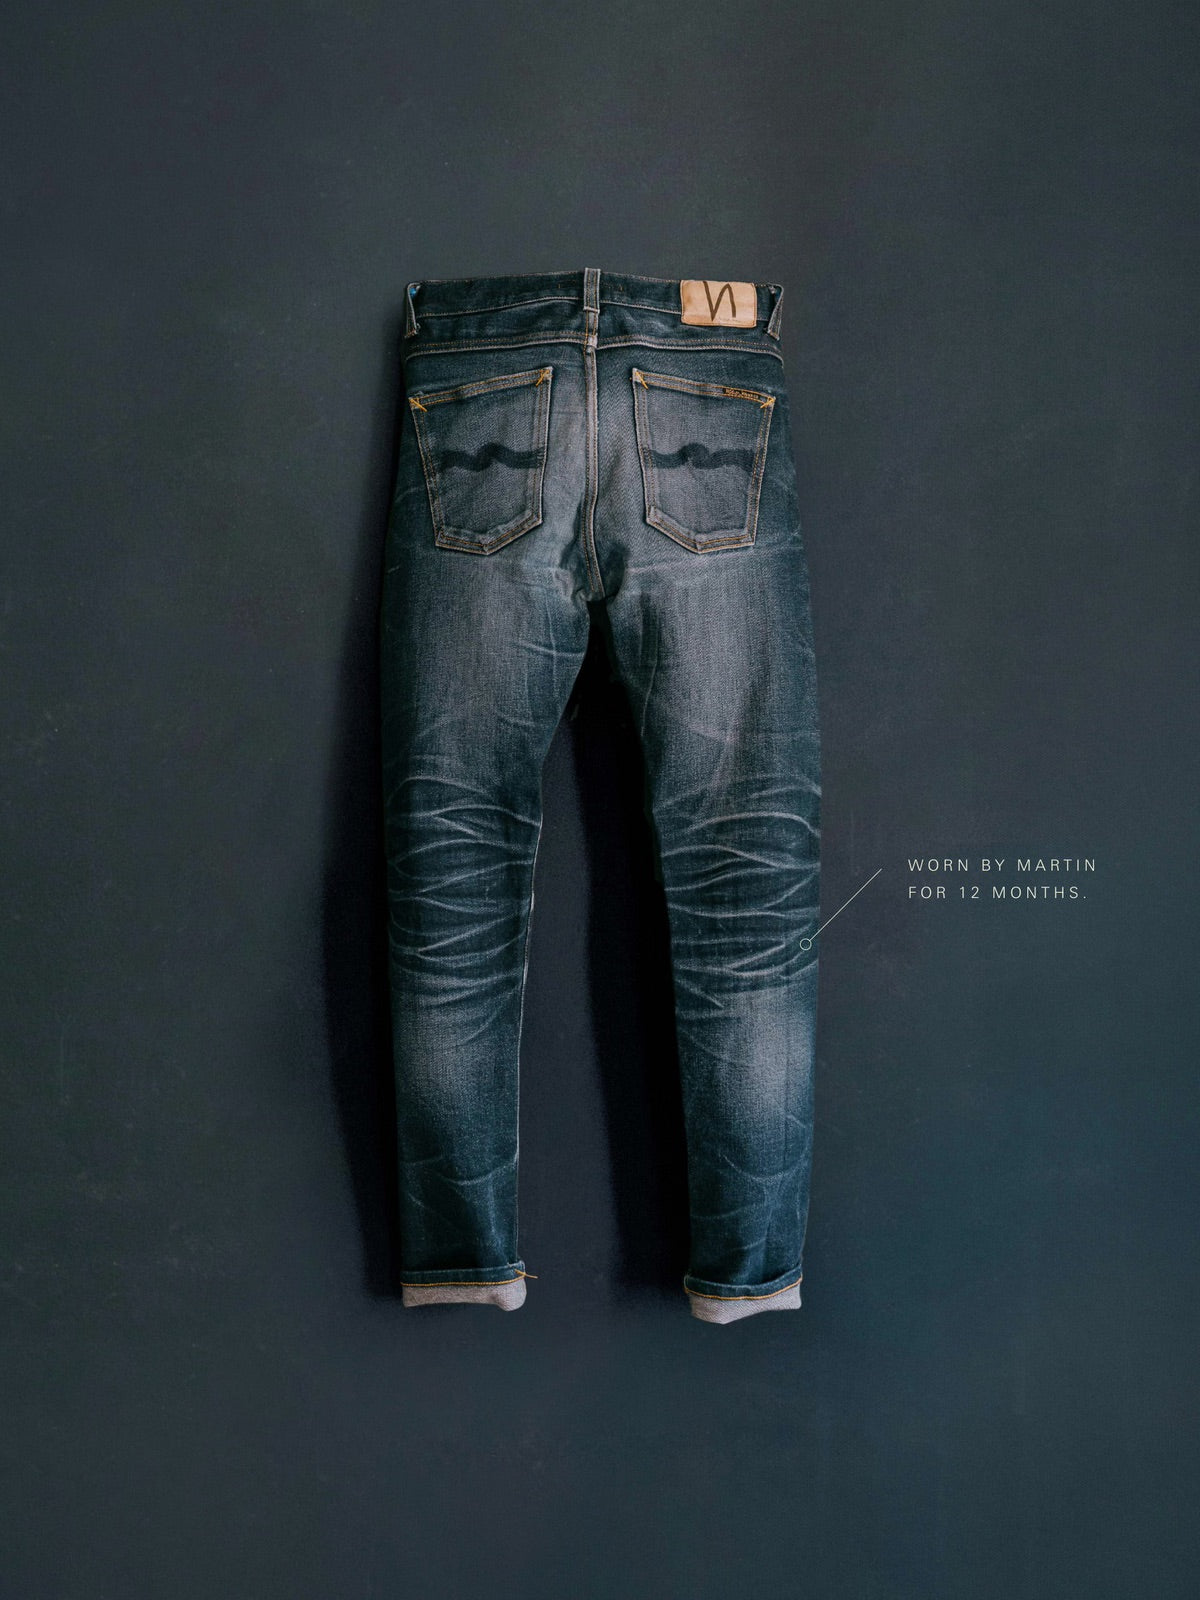 NUDIE JEANS LEAN DEAN DRY SELVAGE - The Blue Ox 916